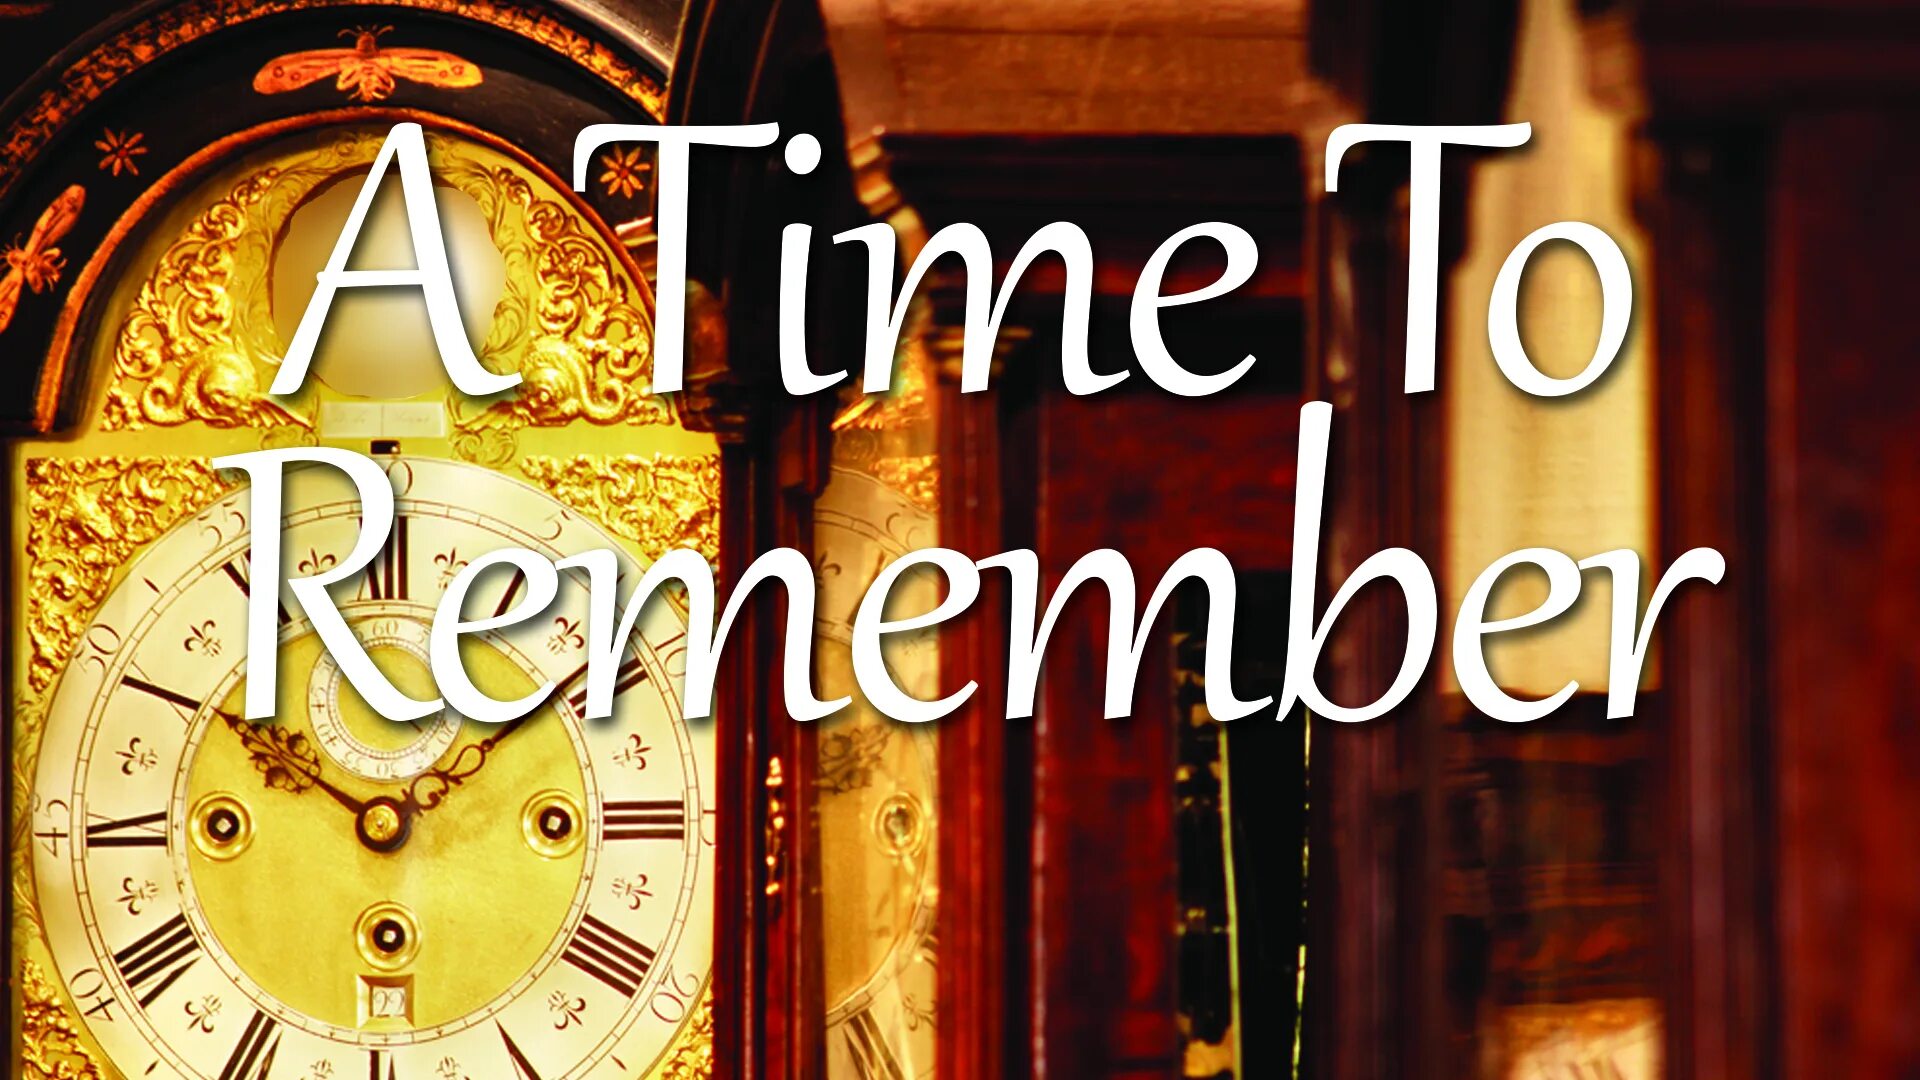 A time to remember. It is time to remember. Time to Loveposter.